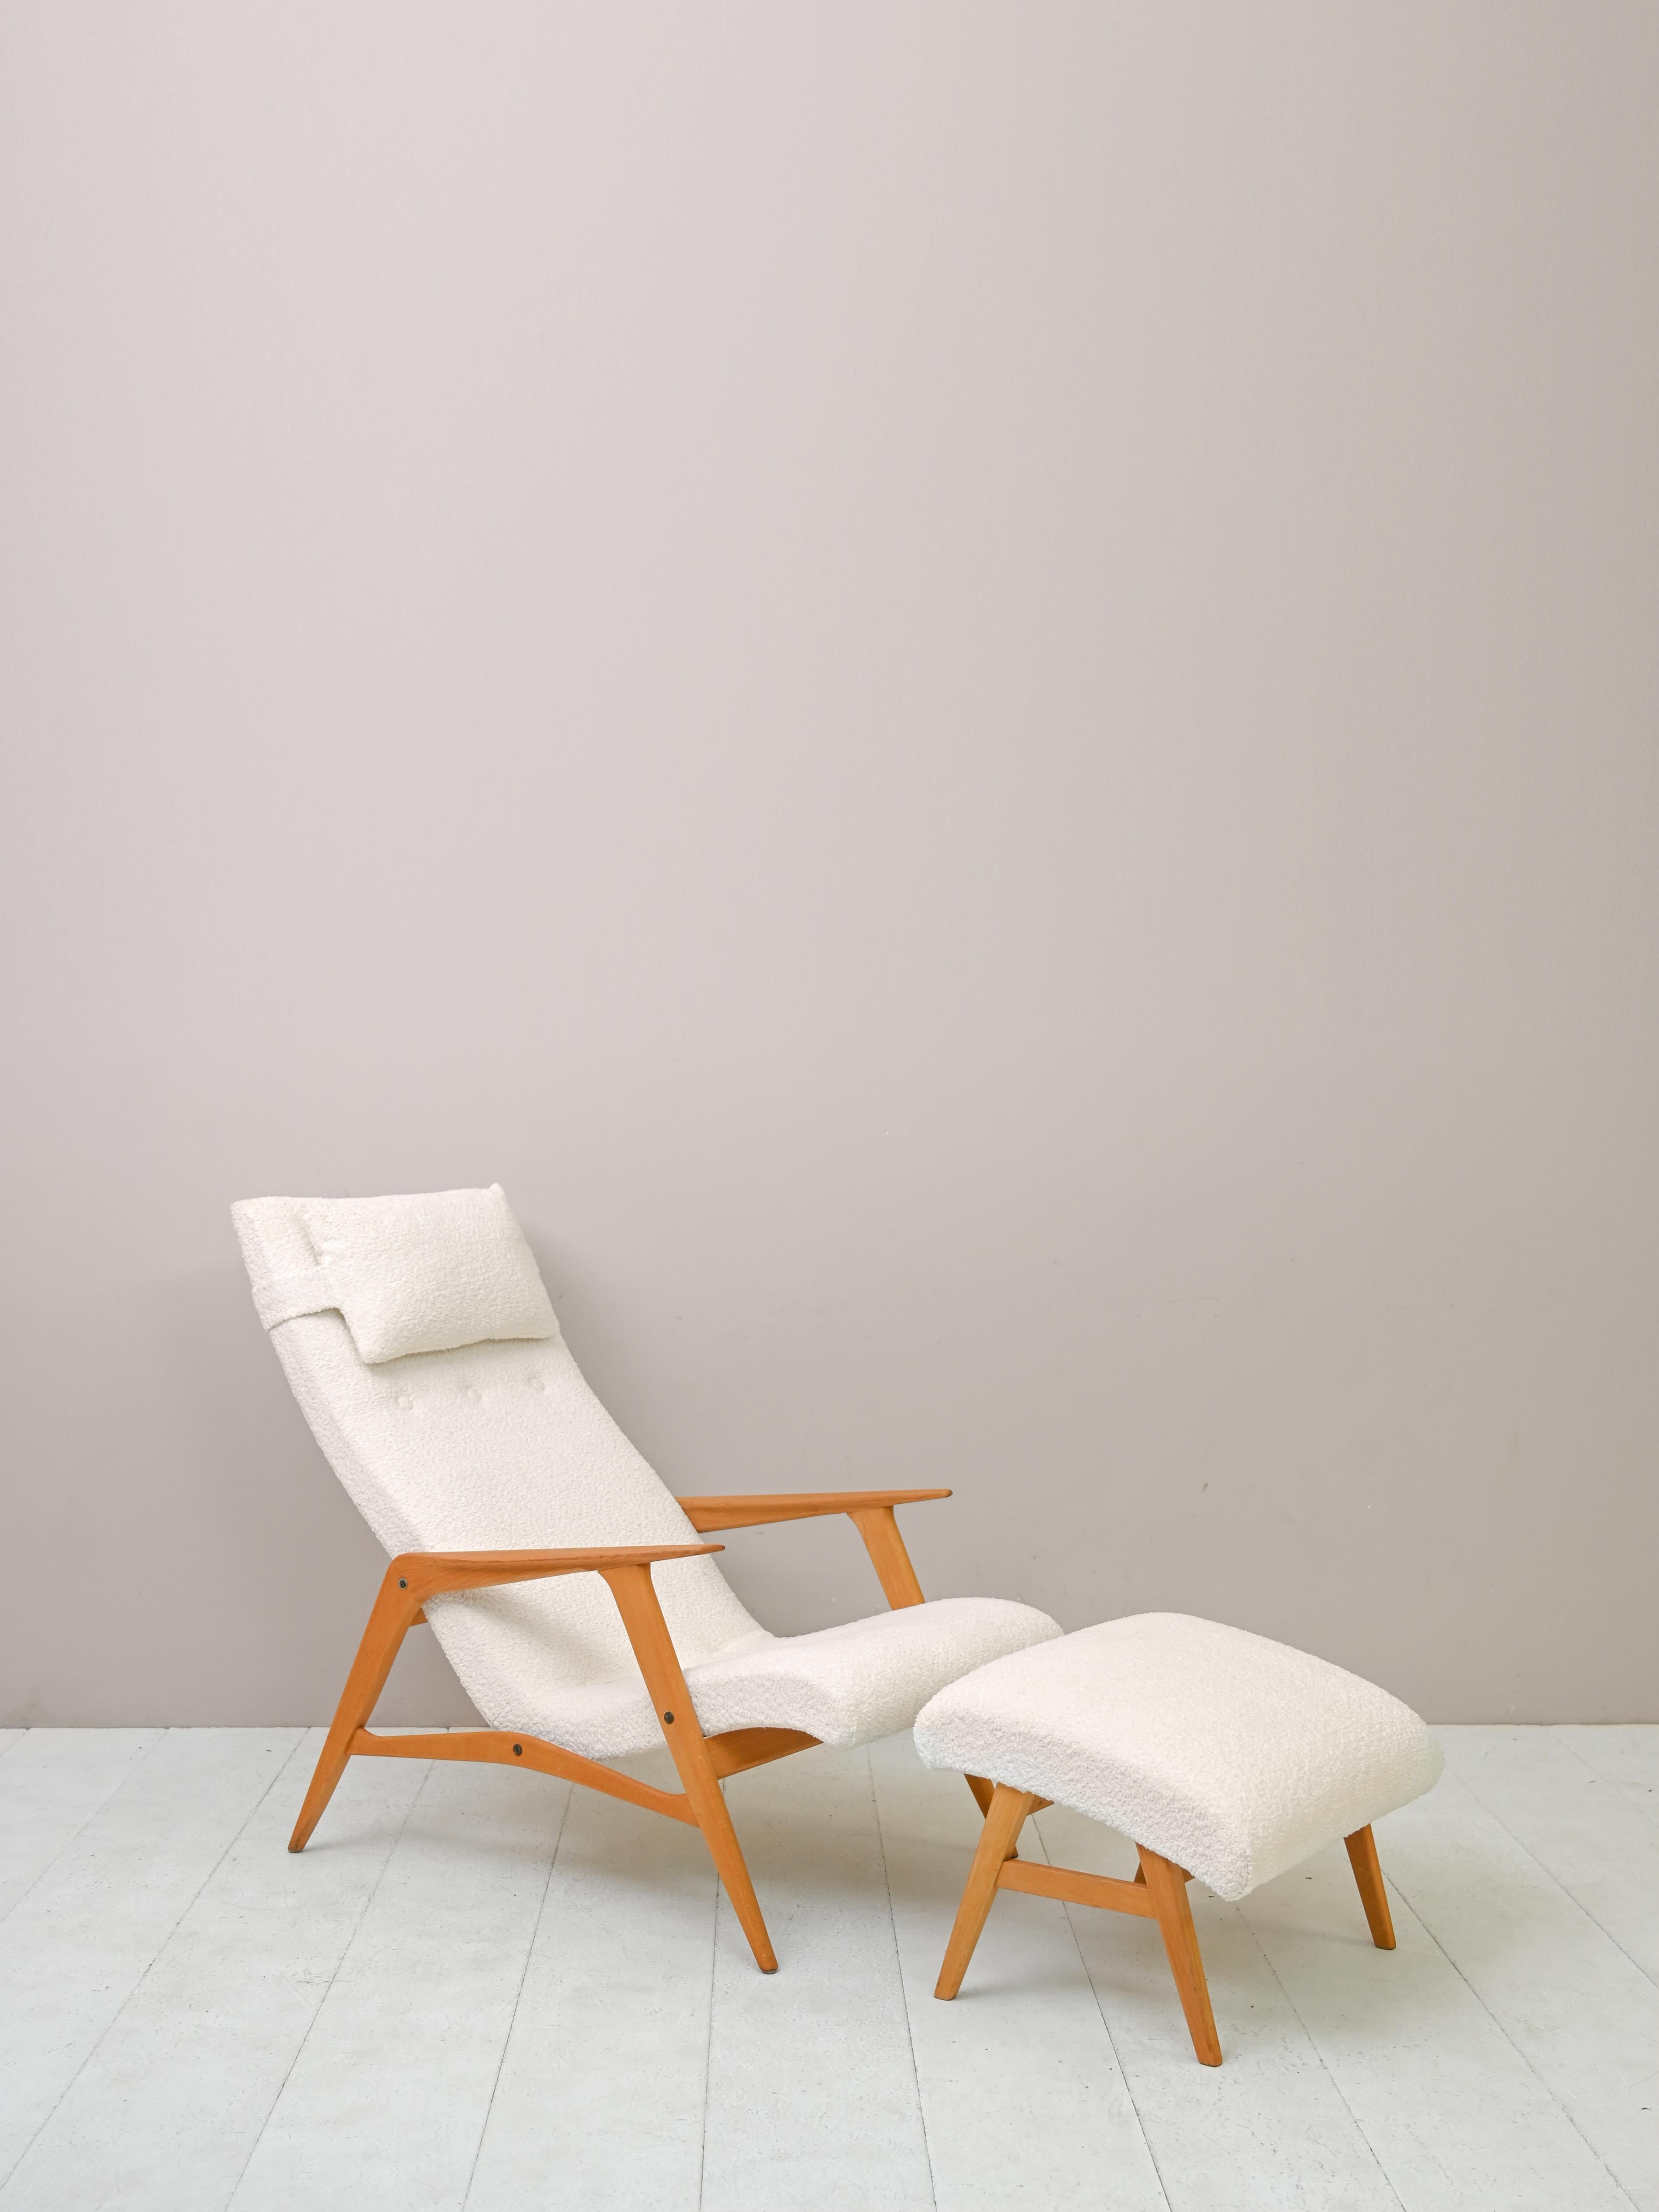 Original Scandinavian 1960s armchair with bouclé fabric.
A unique piece of furniture with timeless beauty, this seat also has its own stool
original. The frame is made of oak wood and the upholstered seat has been covered with boulcé